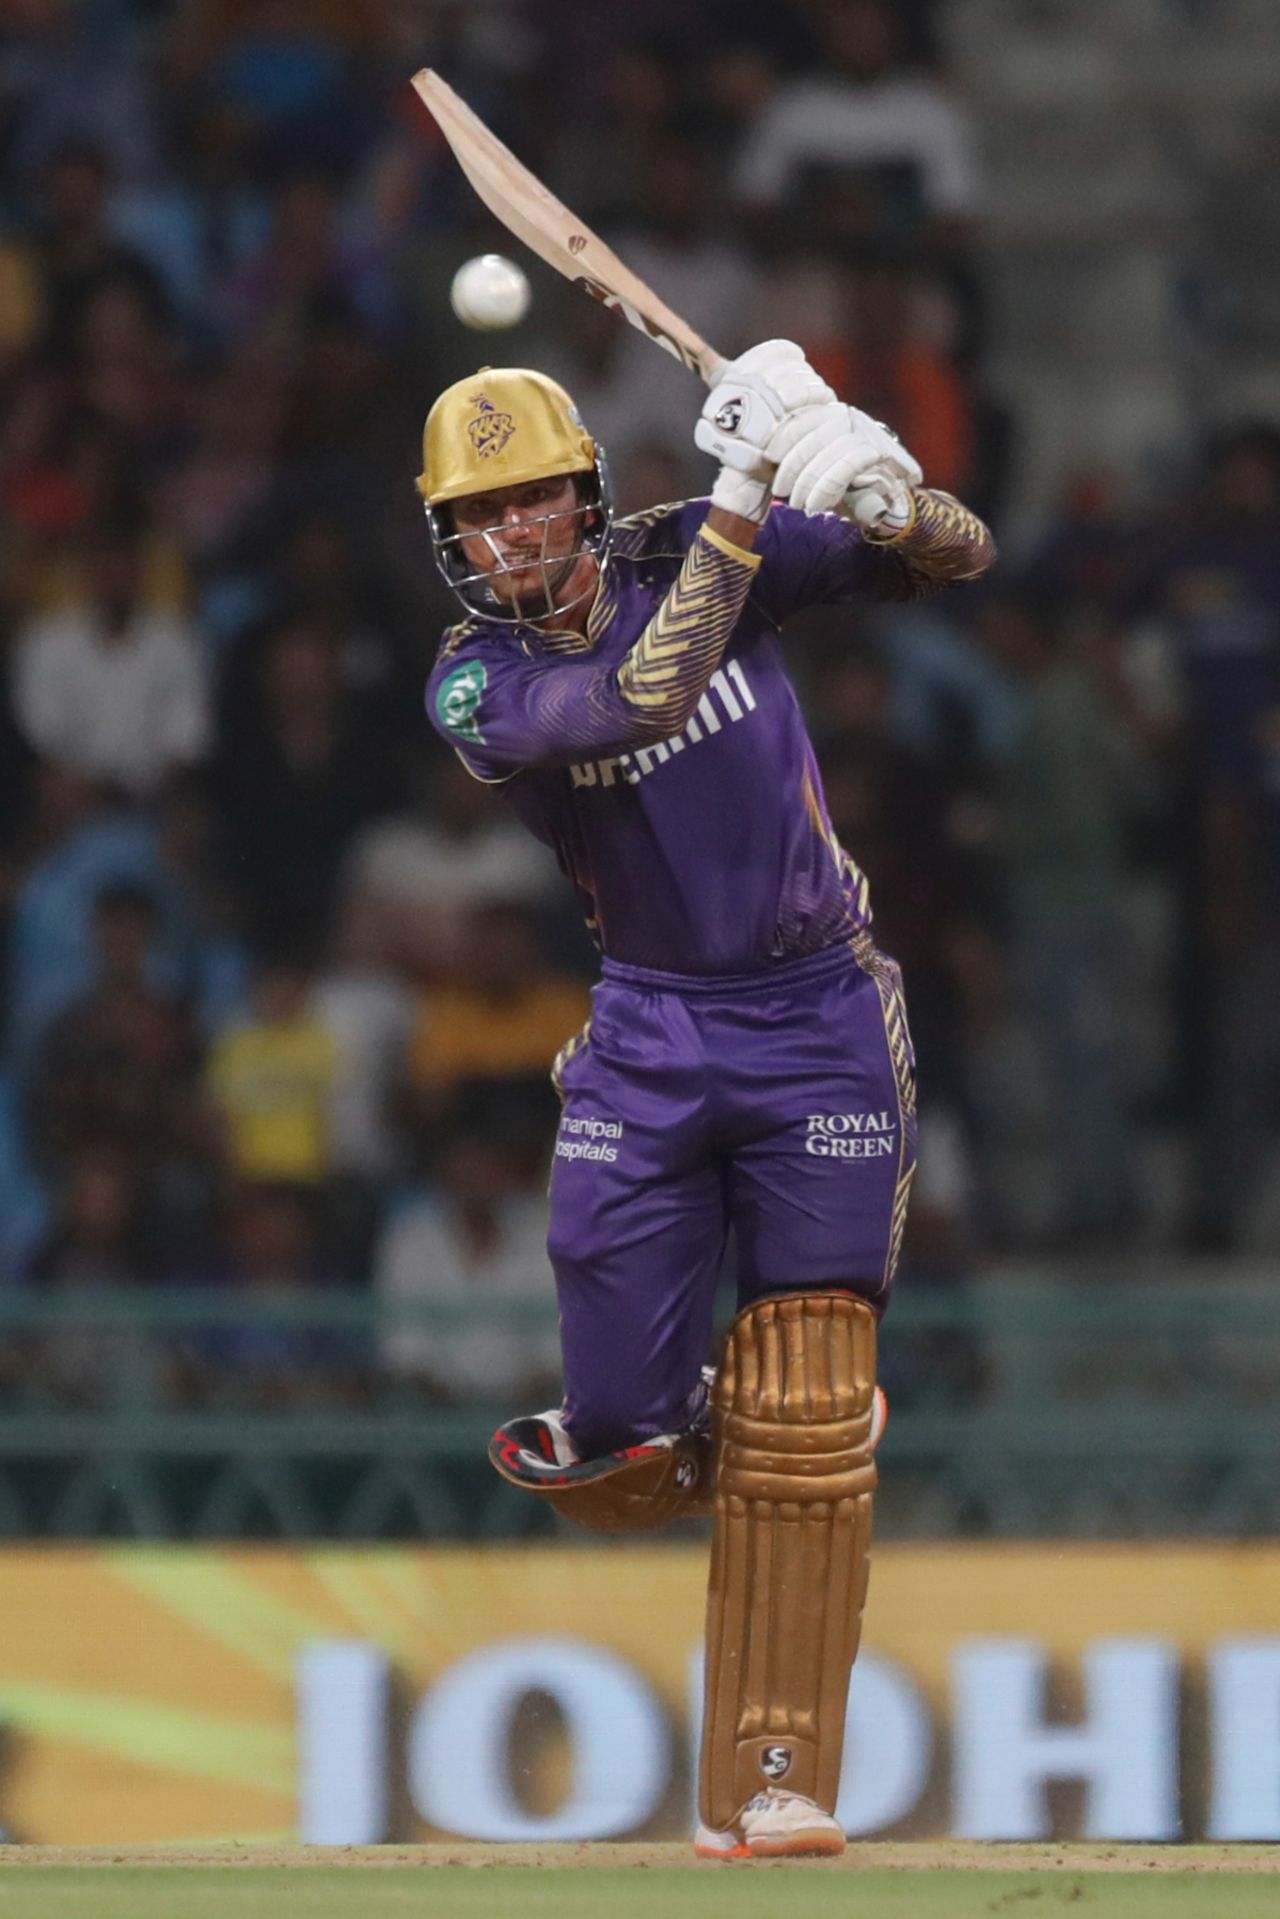 Angkrish Raghuvanshi played second fiddle to Sunil Narine in a key stand, Lucknow Super Giants vs Kolkata Knight Riders, IPL 2024, Lucknow, May 5, 2024